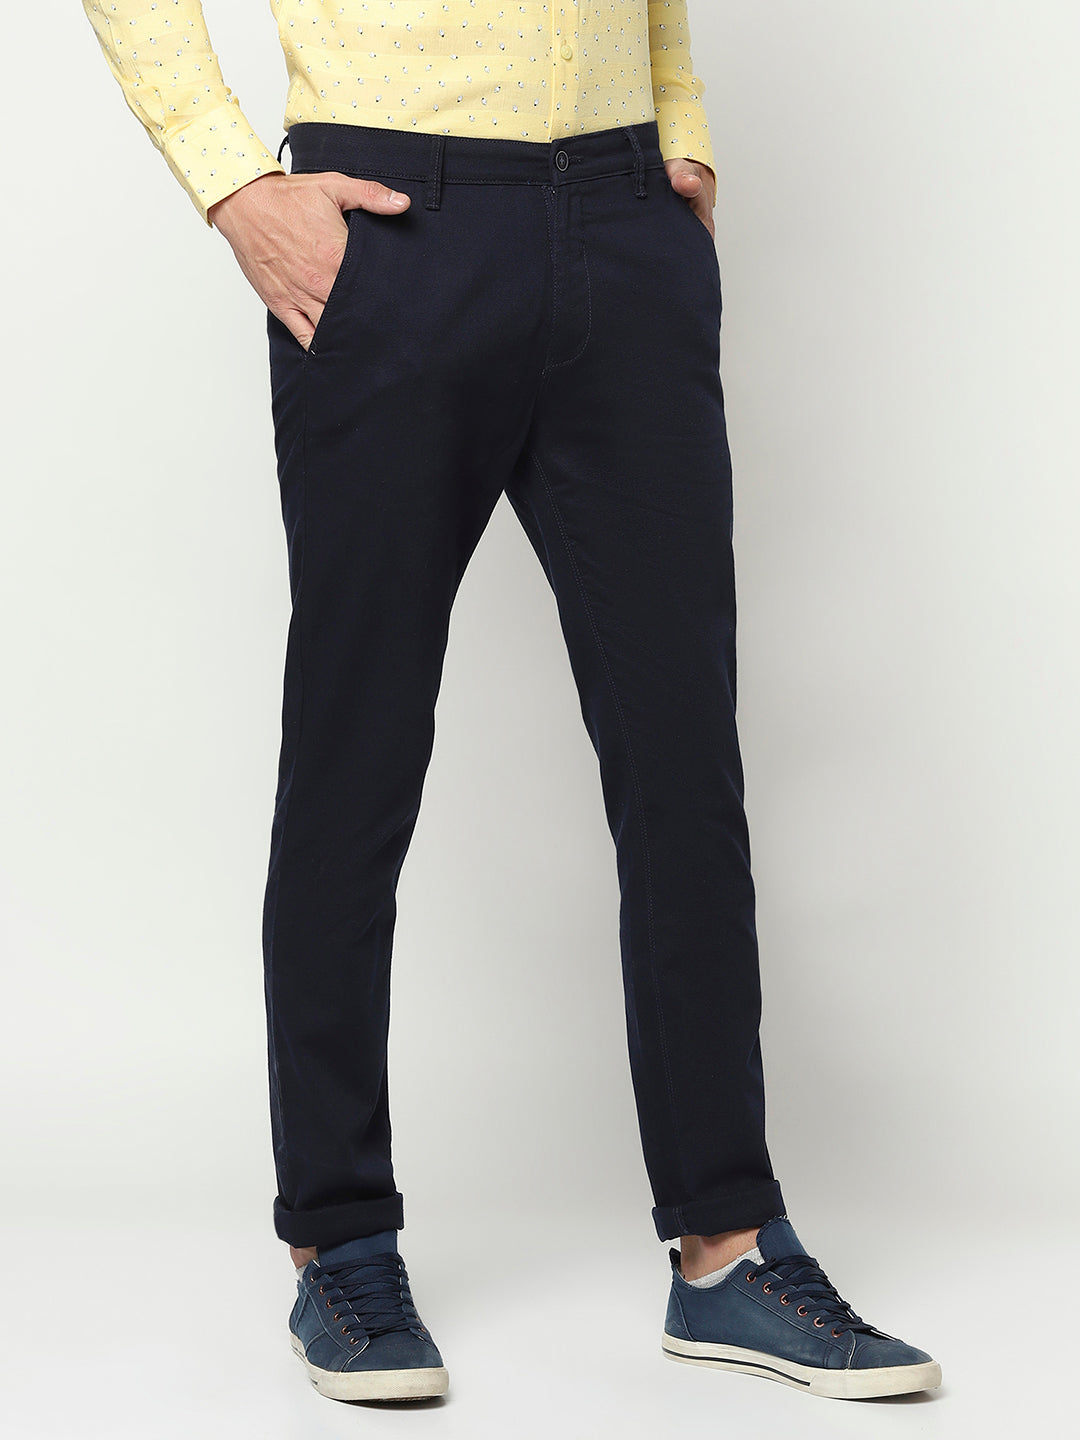 Navy Blue Cuffed Ankle Trousers-Men Trousers-Crimsoune Club